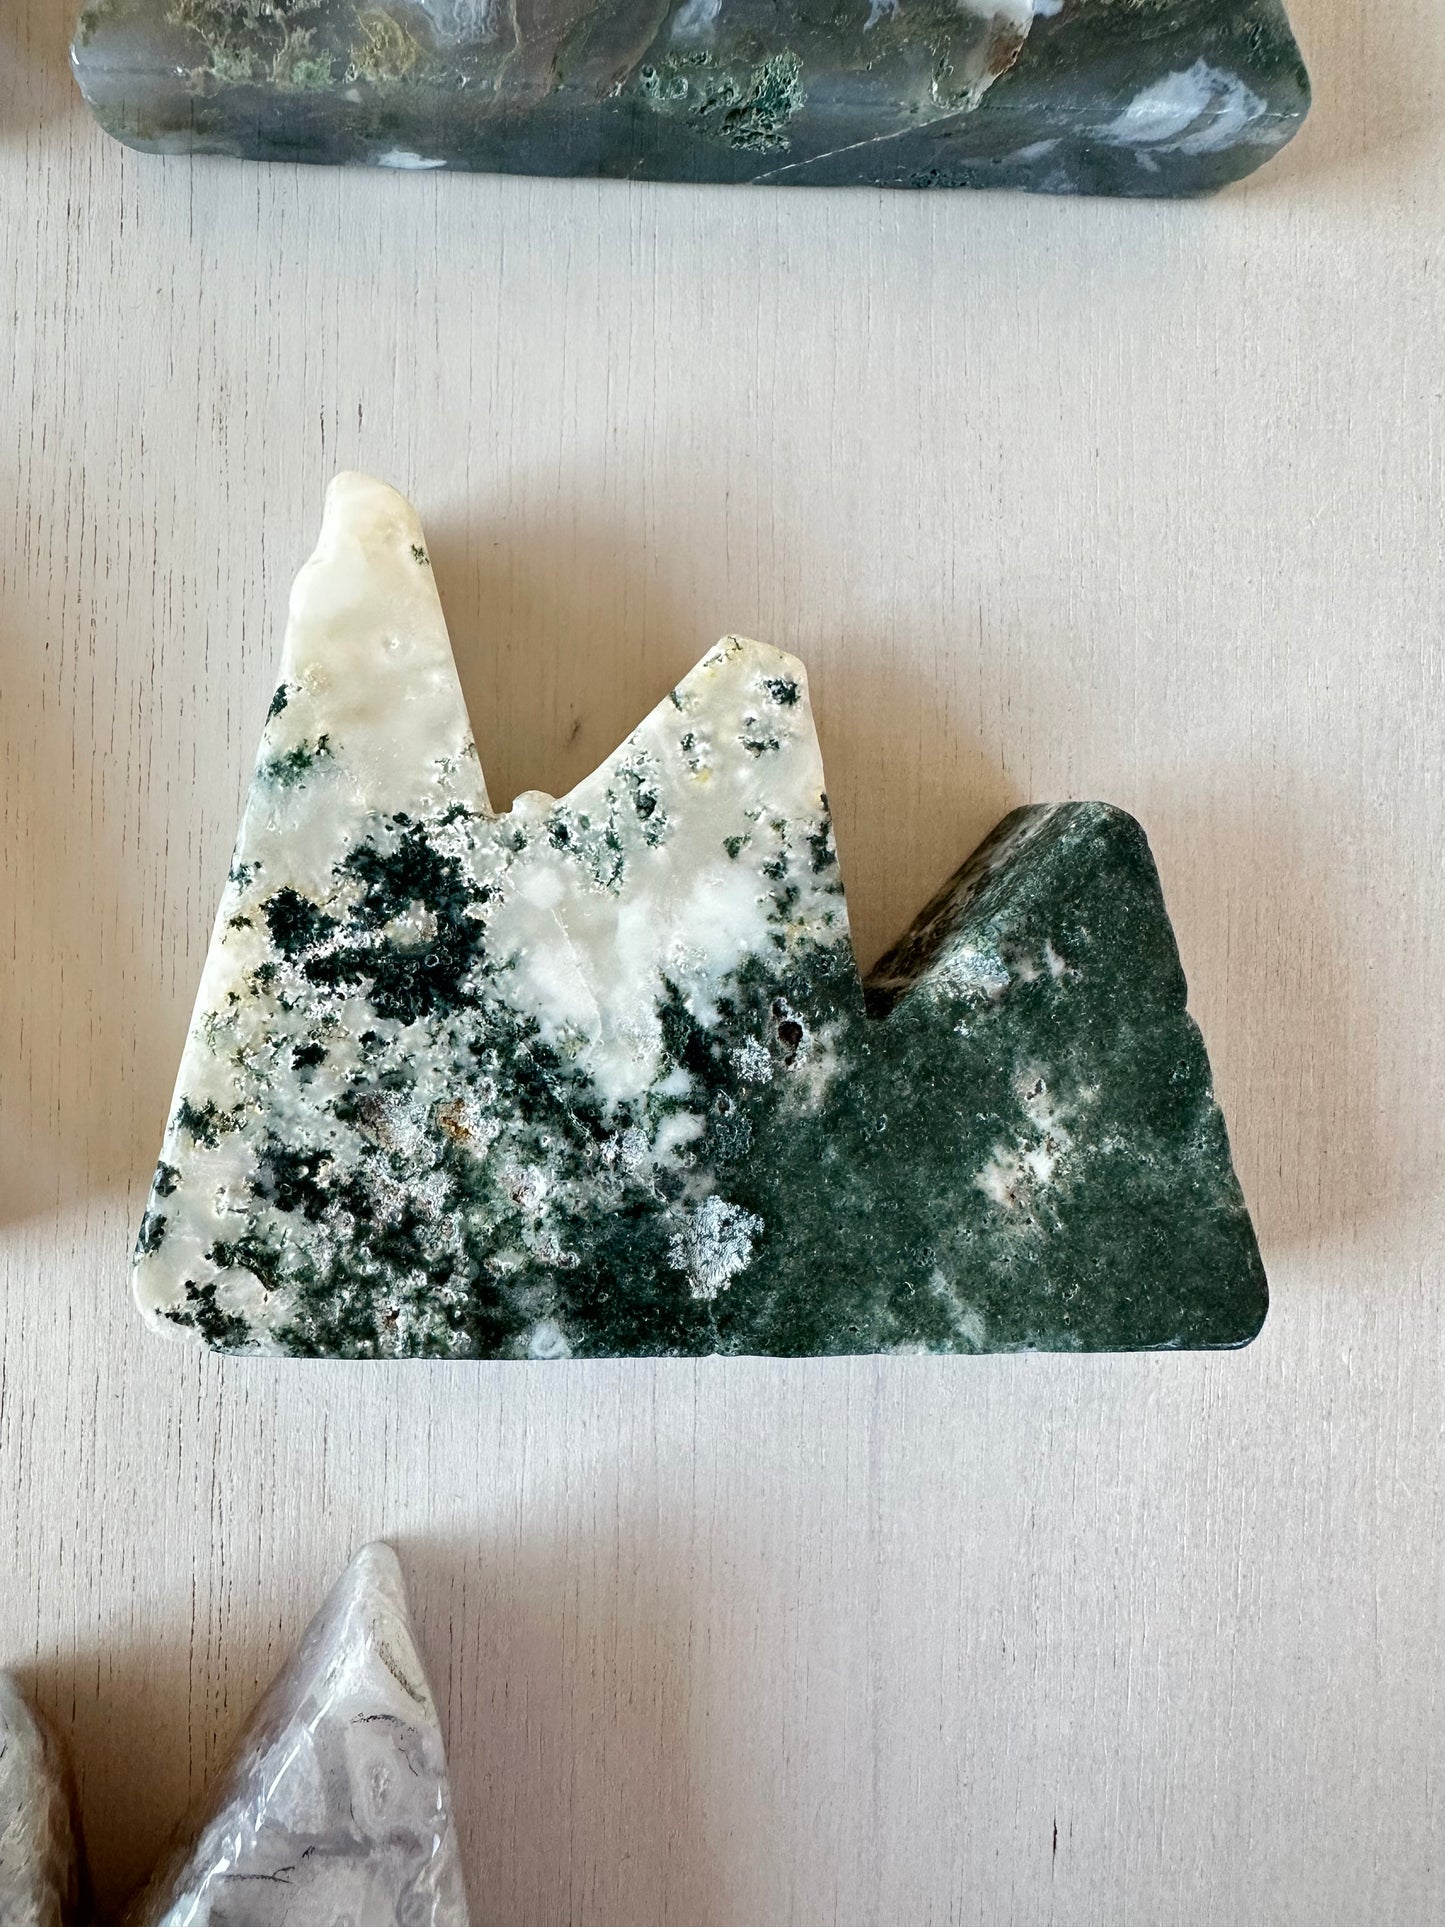 Moss Agate Mountains | Carved Mountain Crystal | Moss Agate Carving